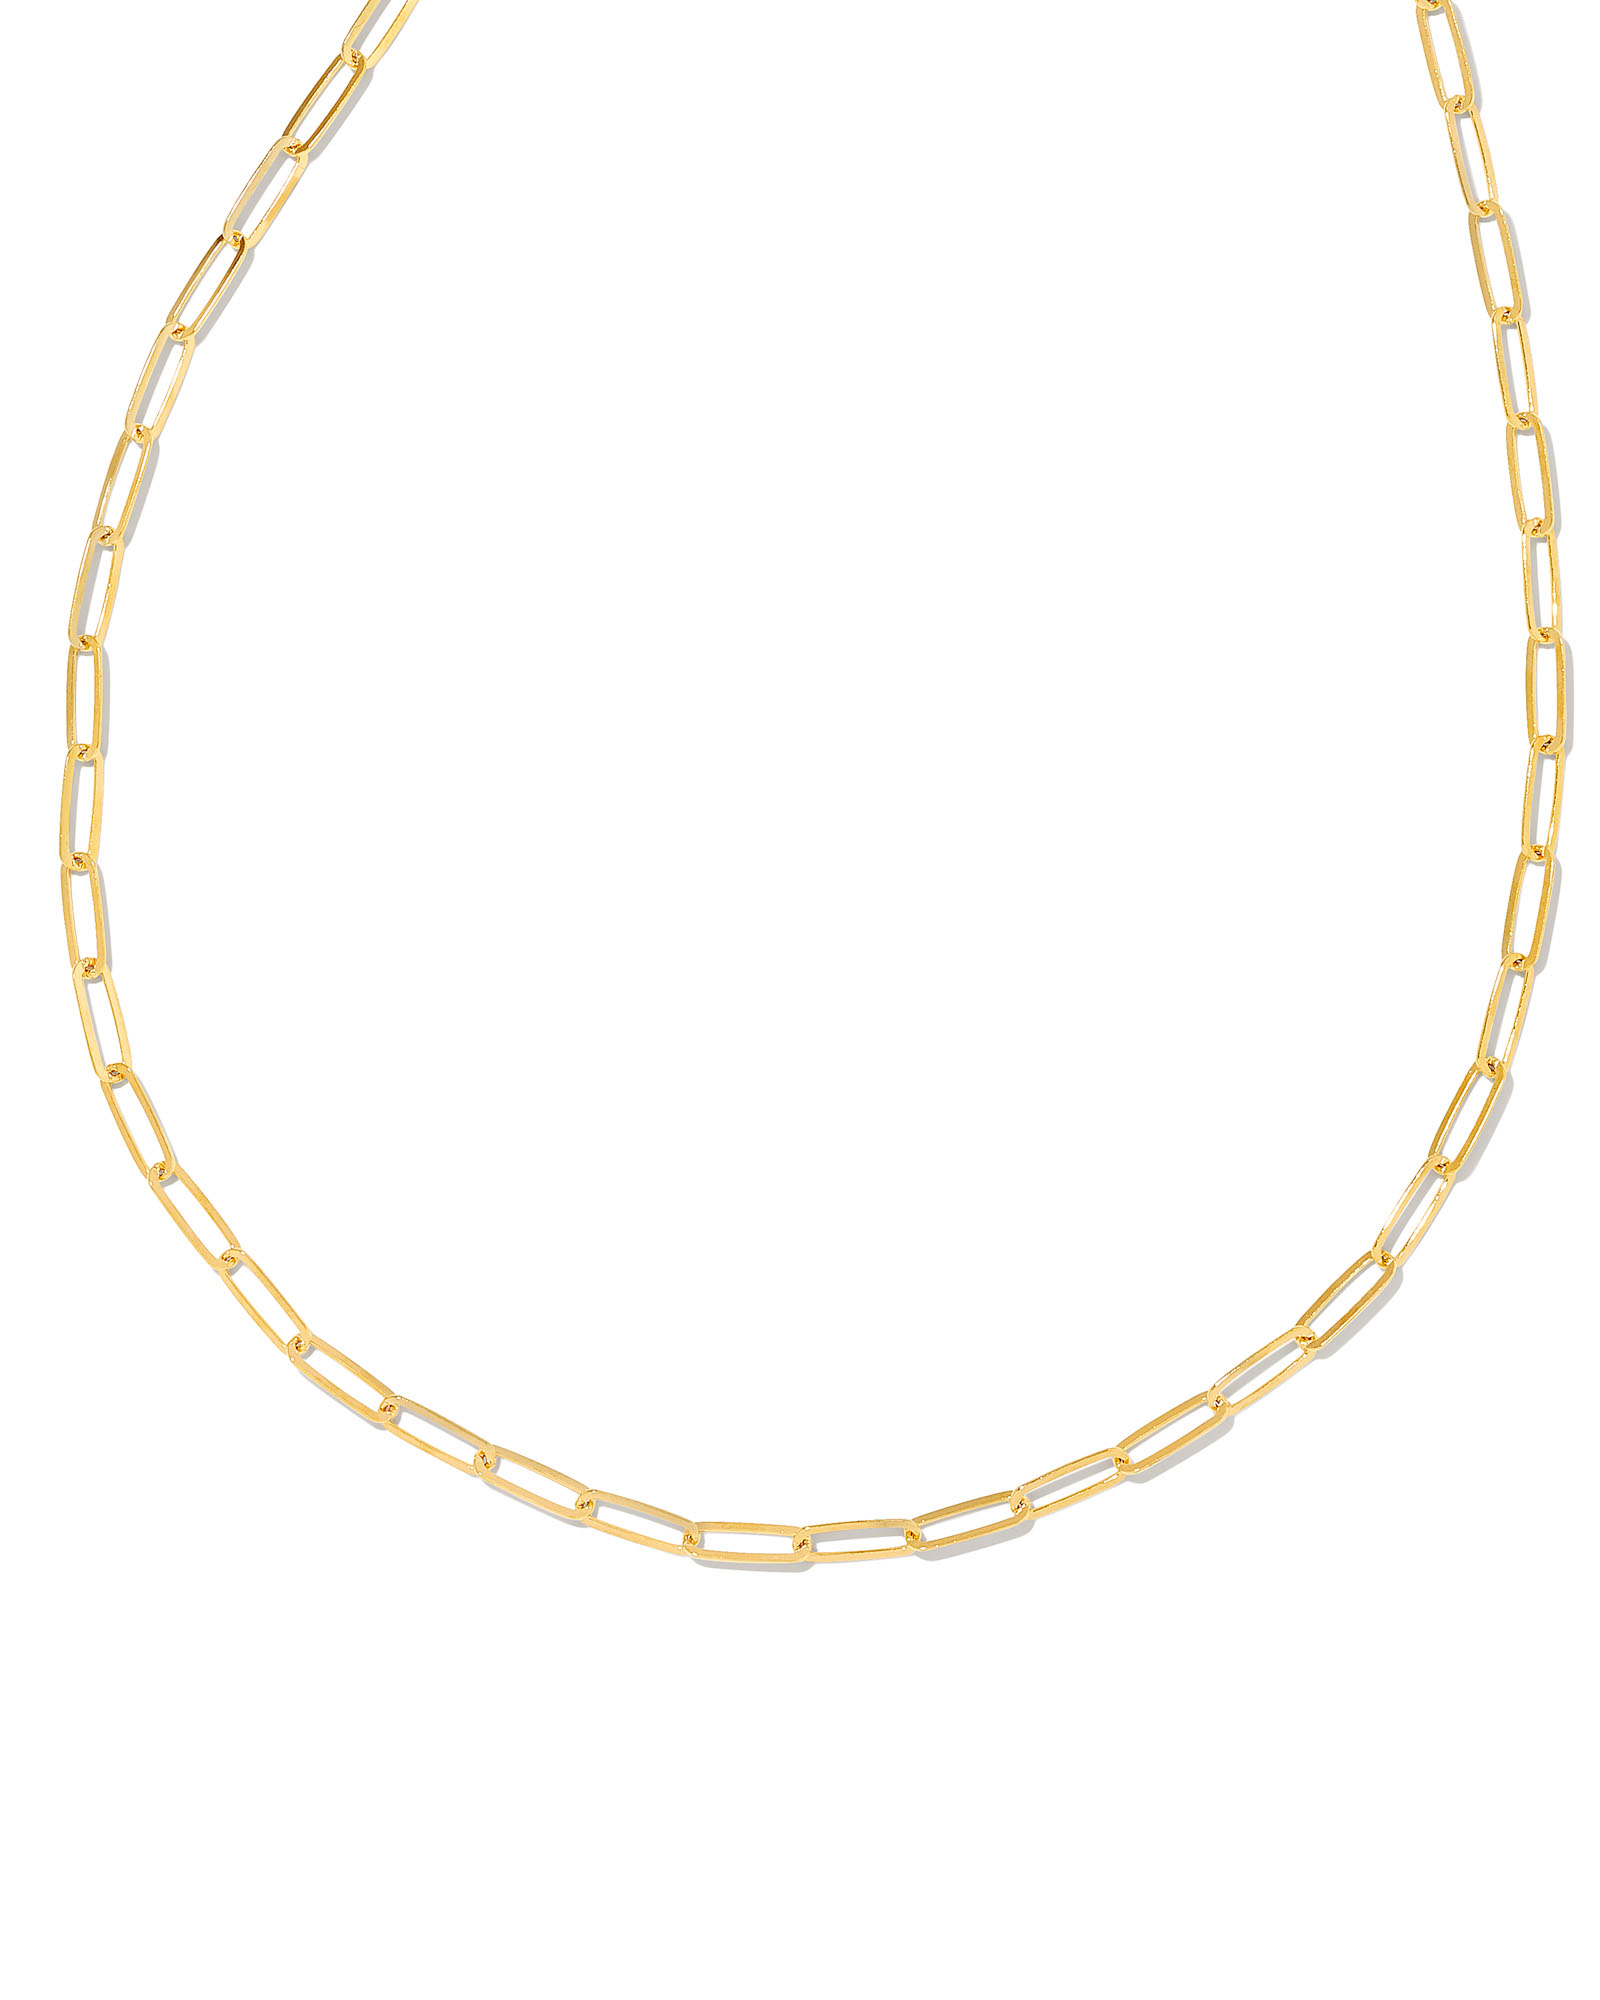 Large Paperclip Chain Necklace in 18k Yellow Gold Vermeil